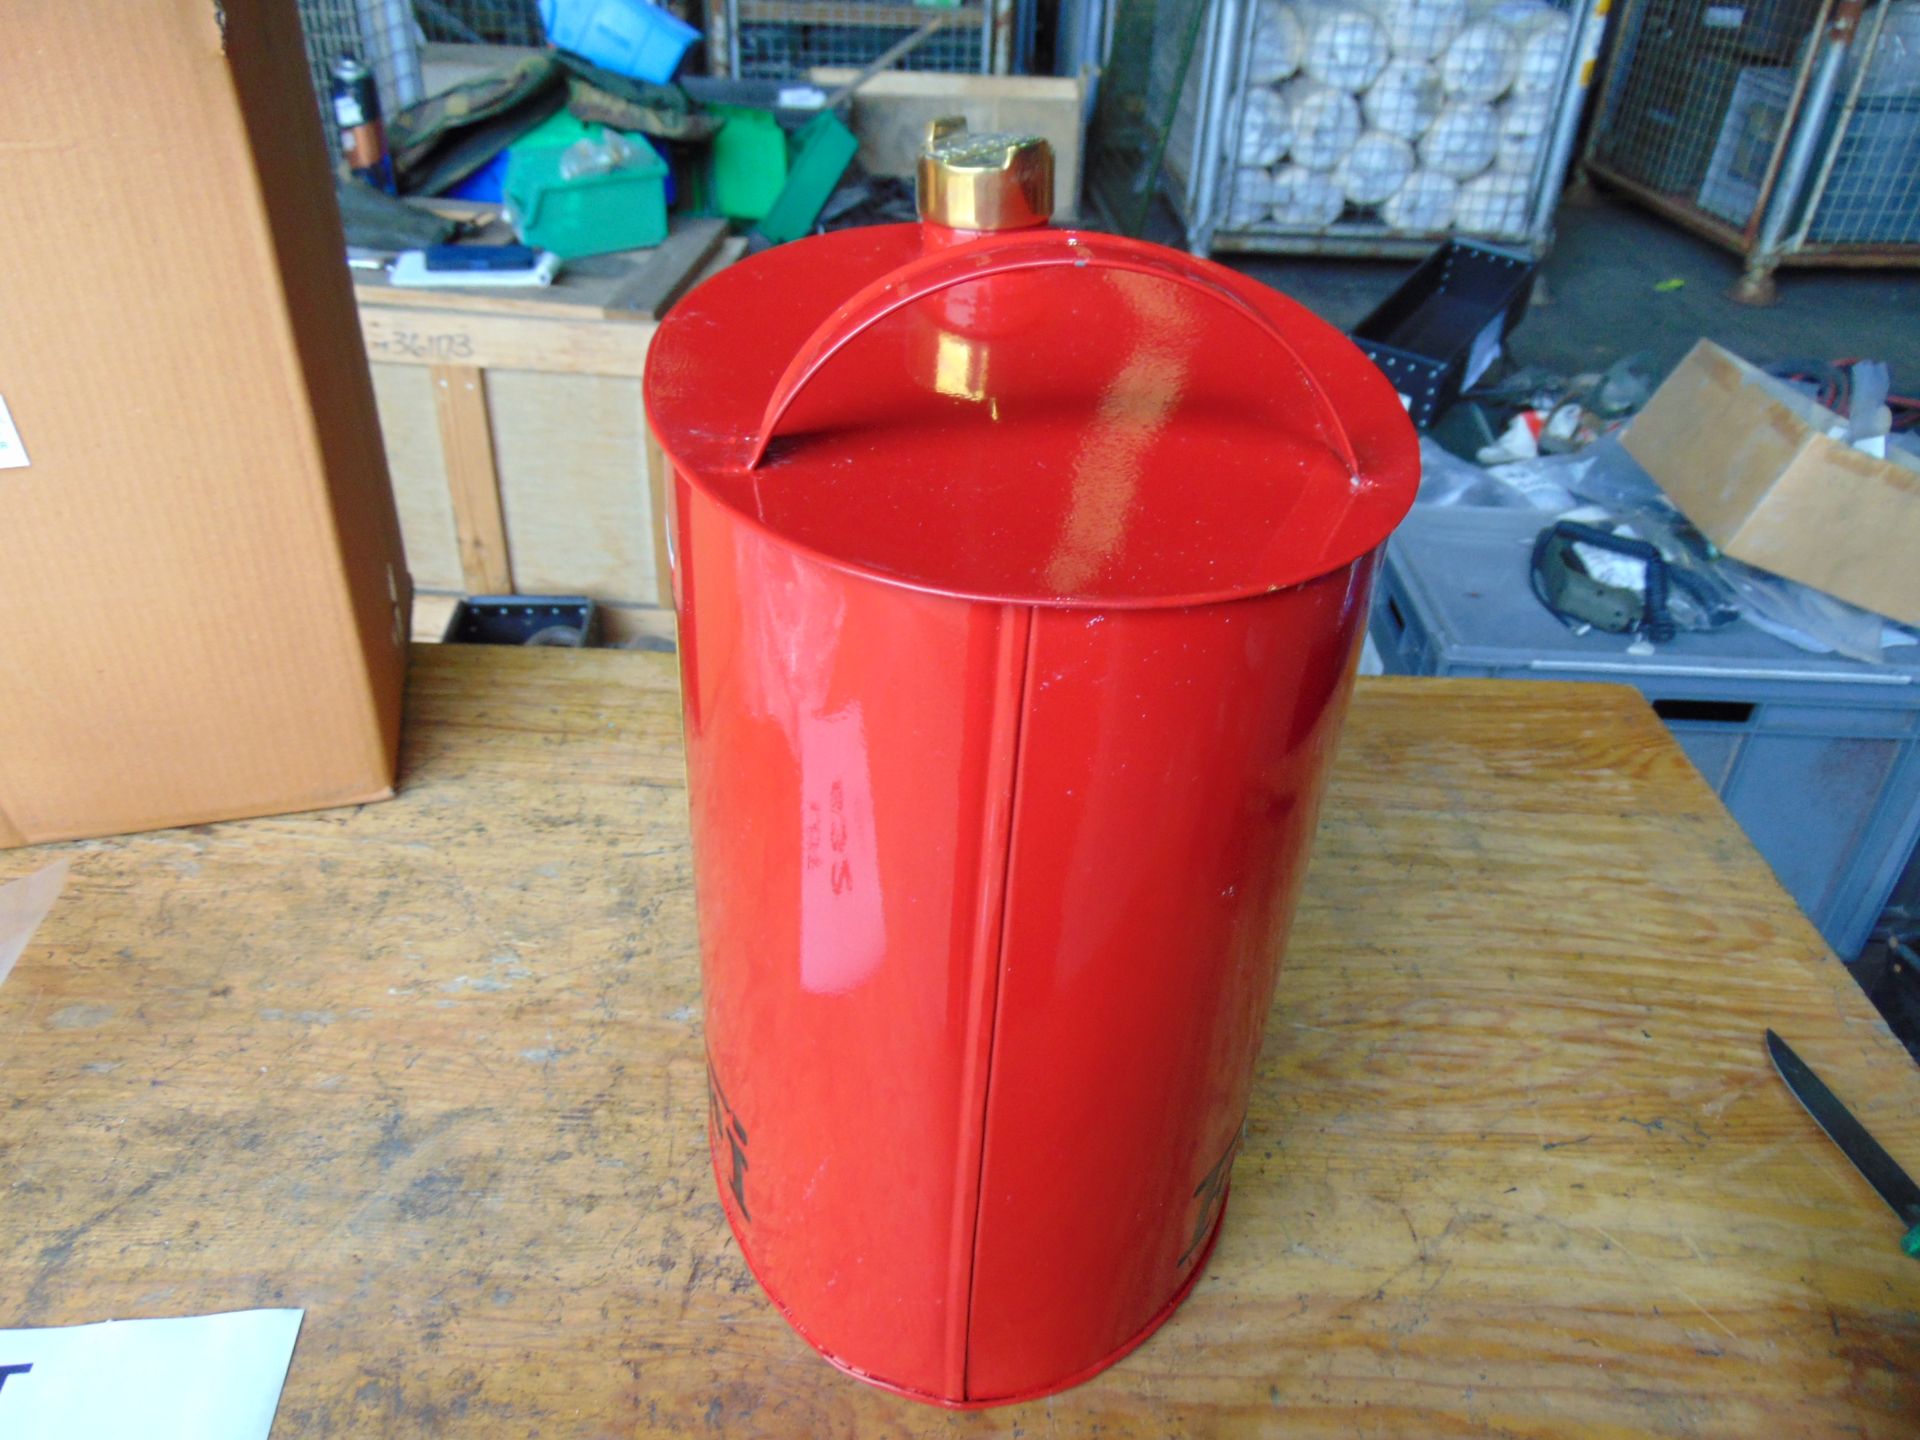 Ferrari Hand Painted 1 Gall Fuel/Oil Can with Brass Cap - Image 4 of 5